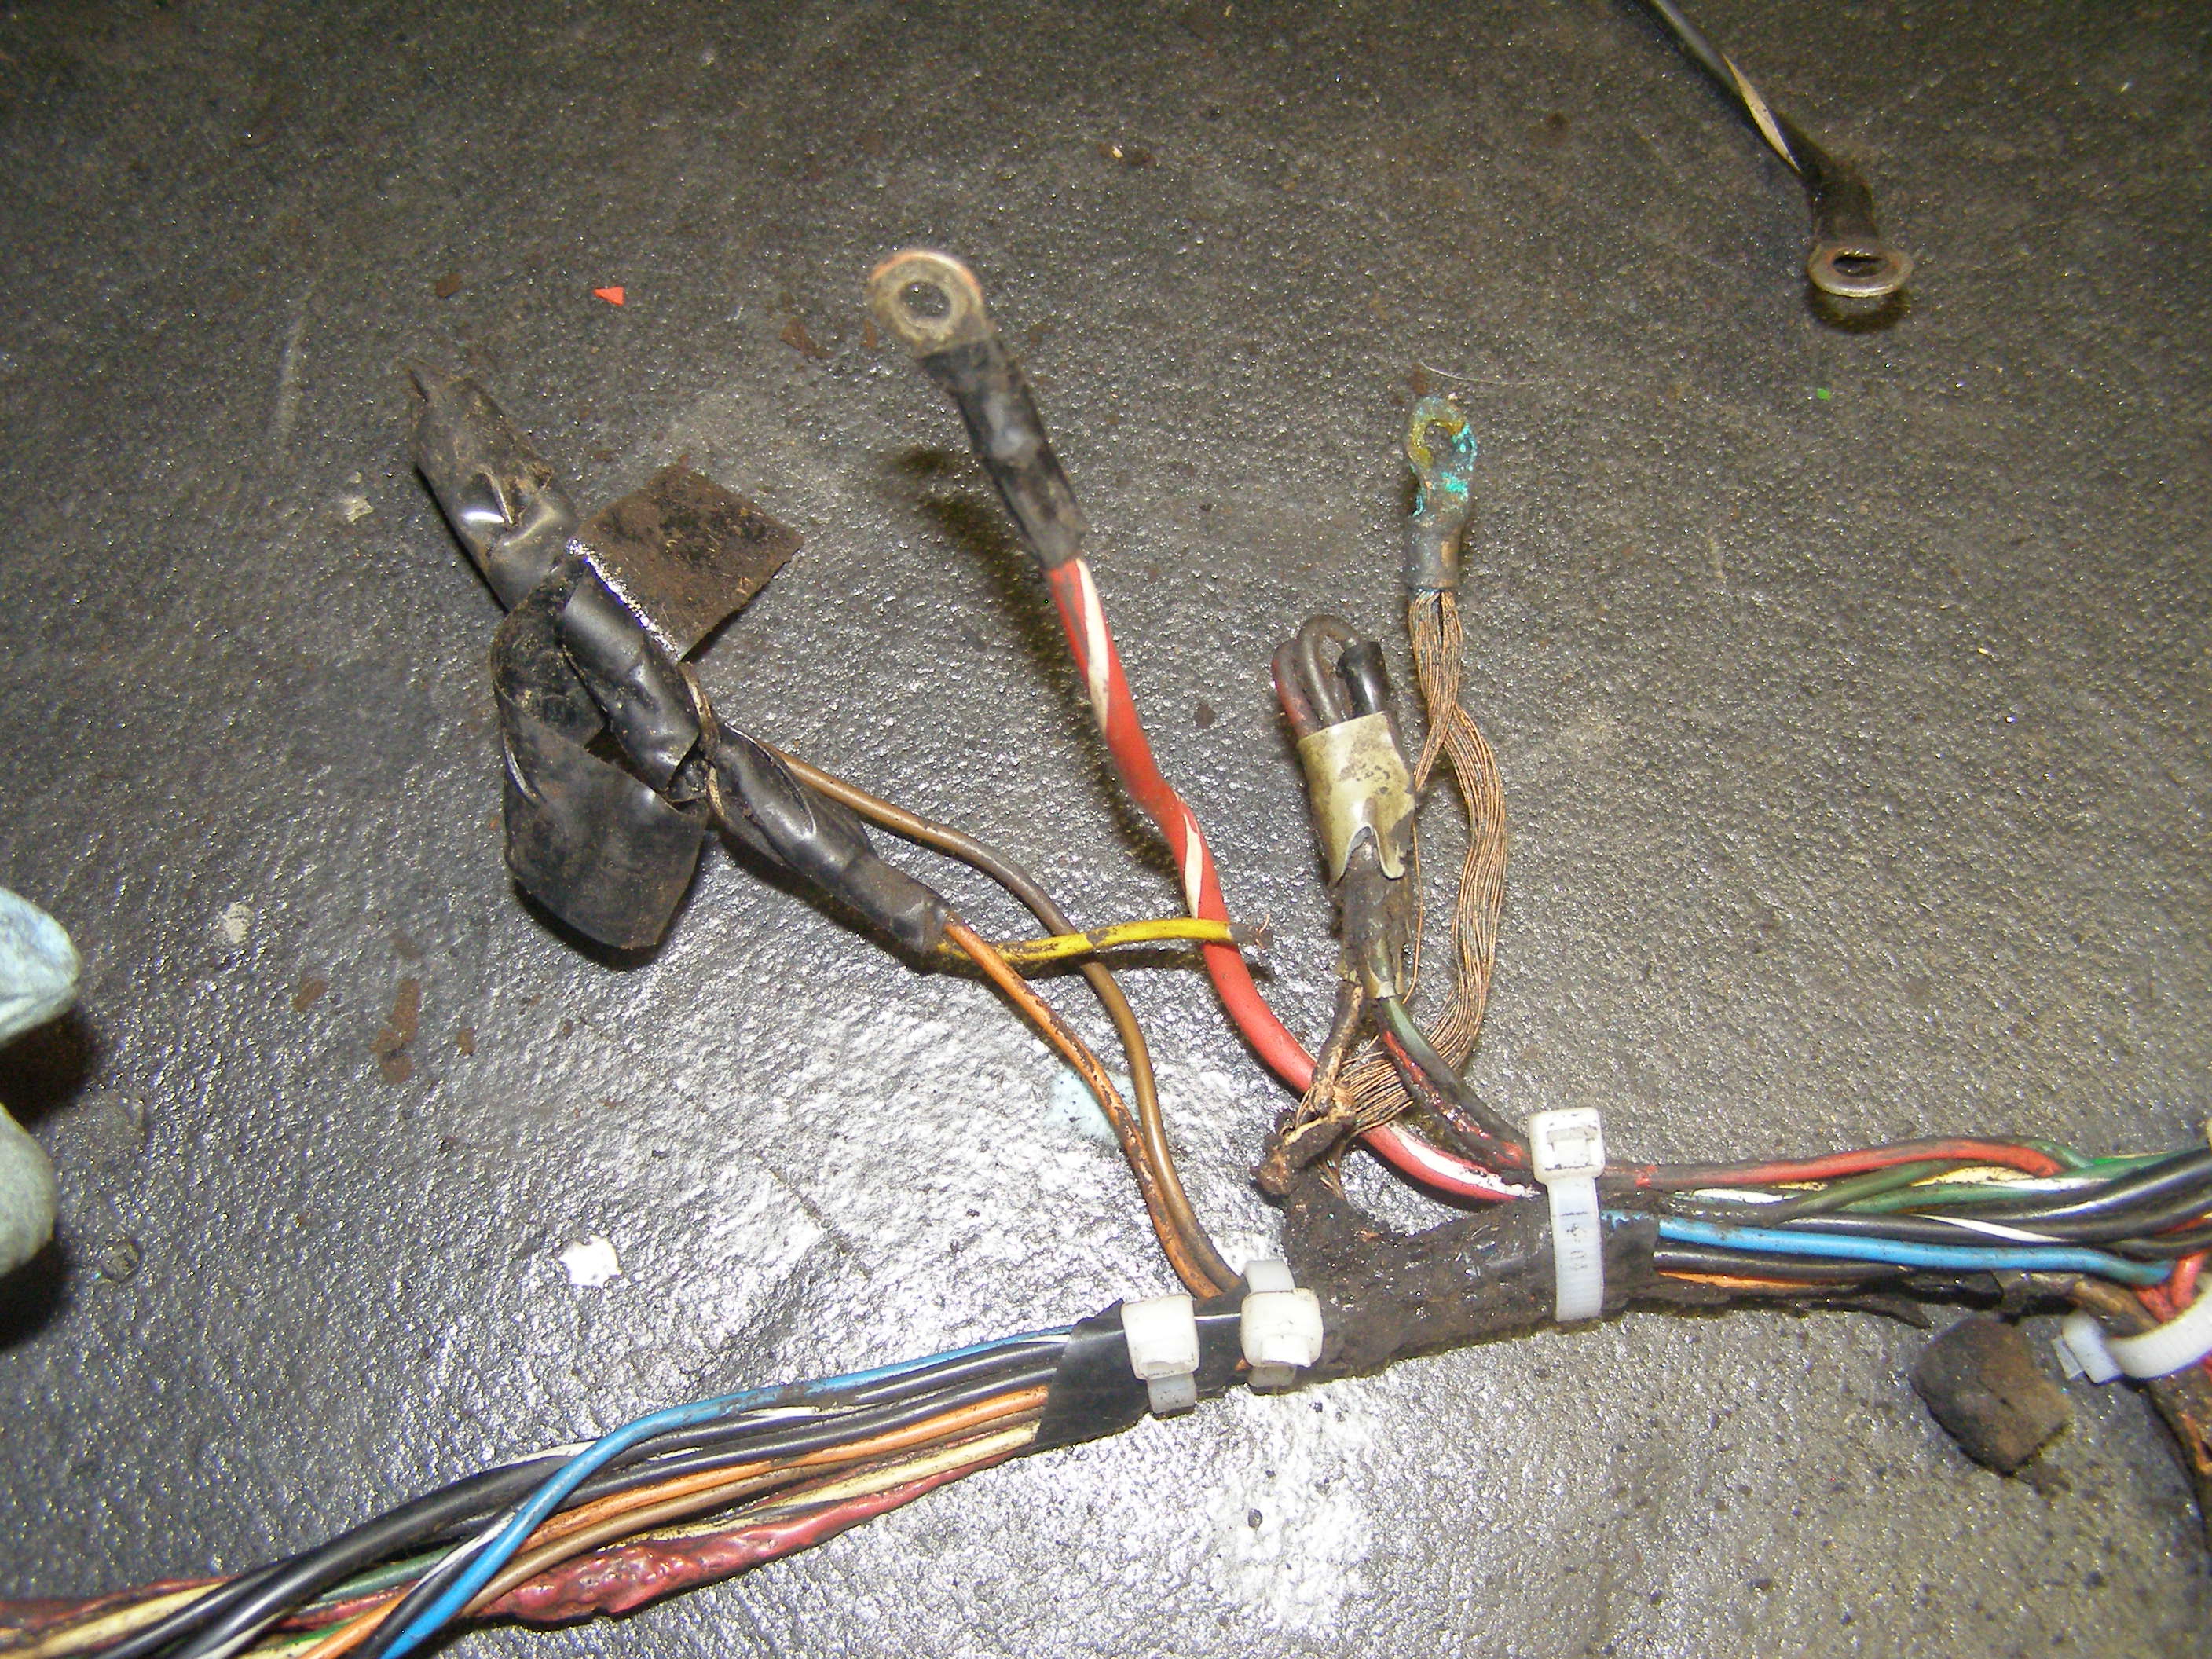 Wiring Harness With Burned Wires And Poor Repair Jobs